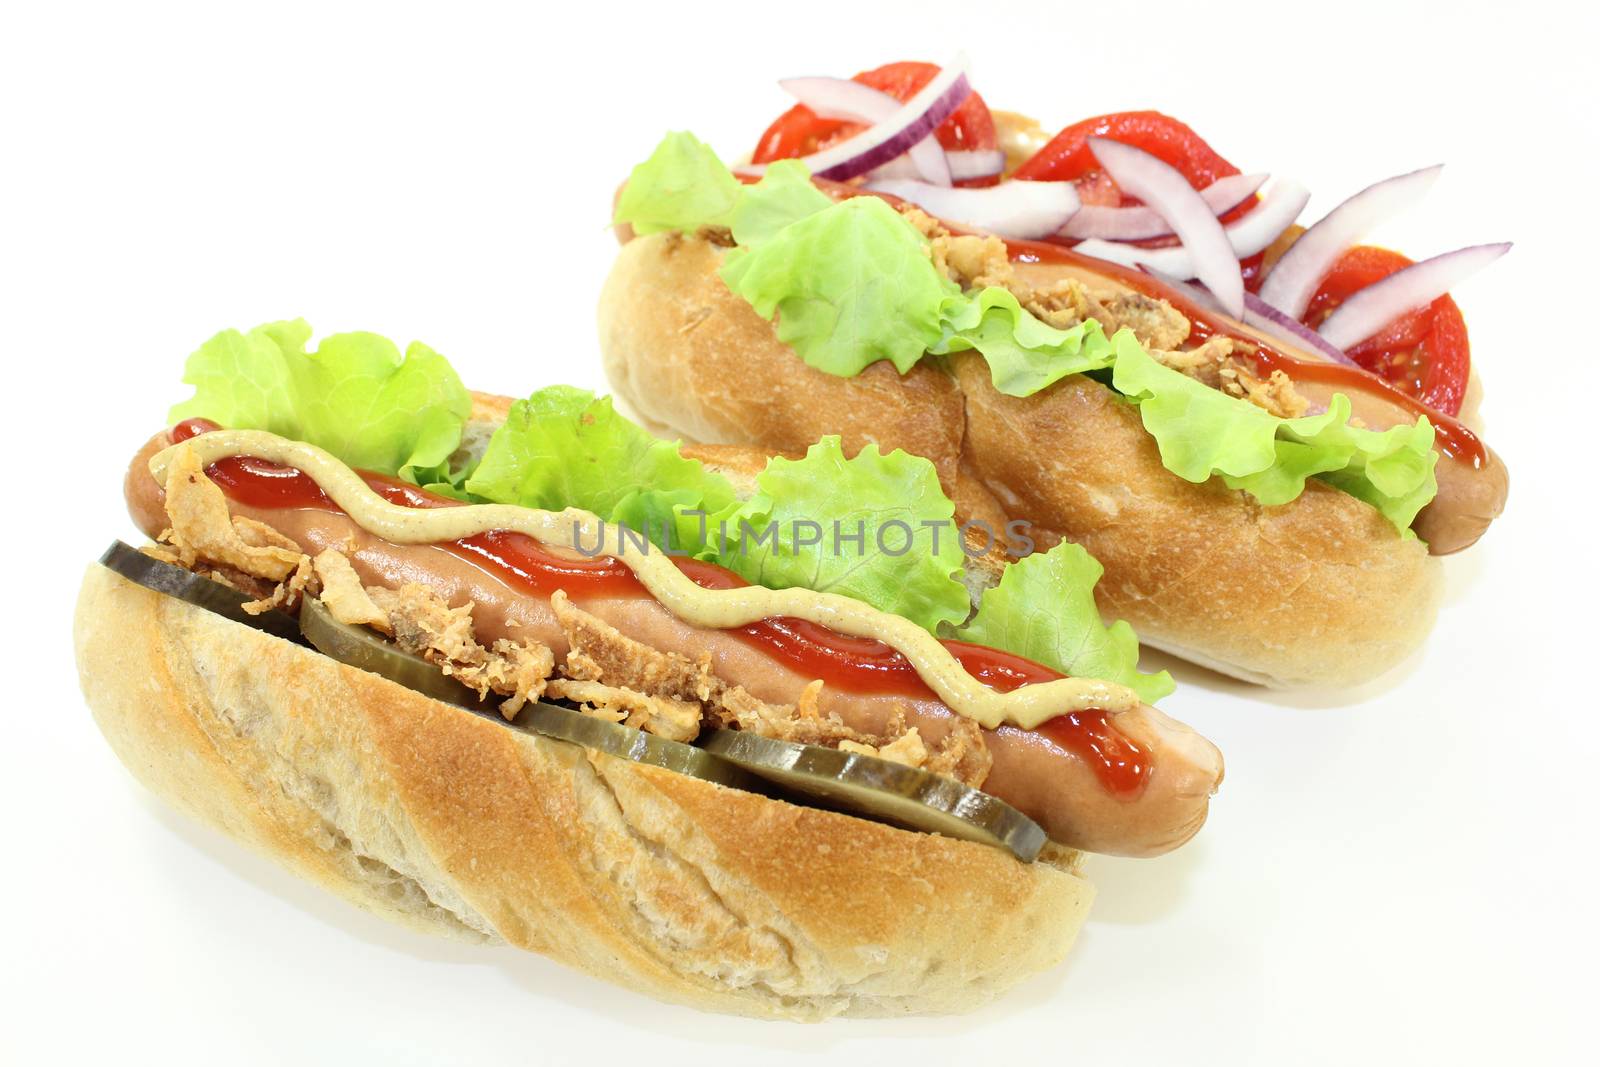 various Hot Dog's in front of white background